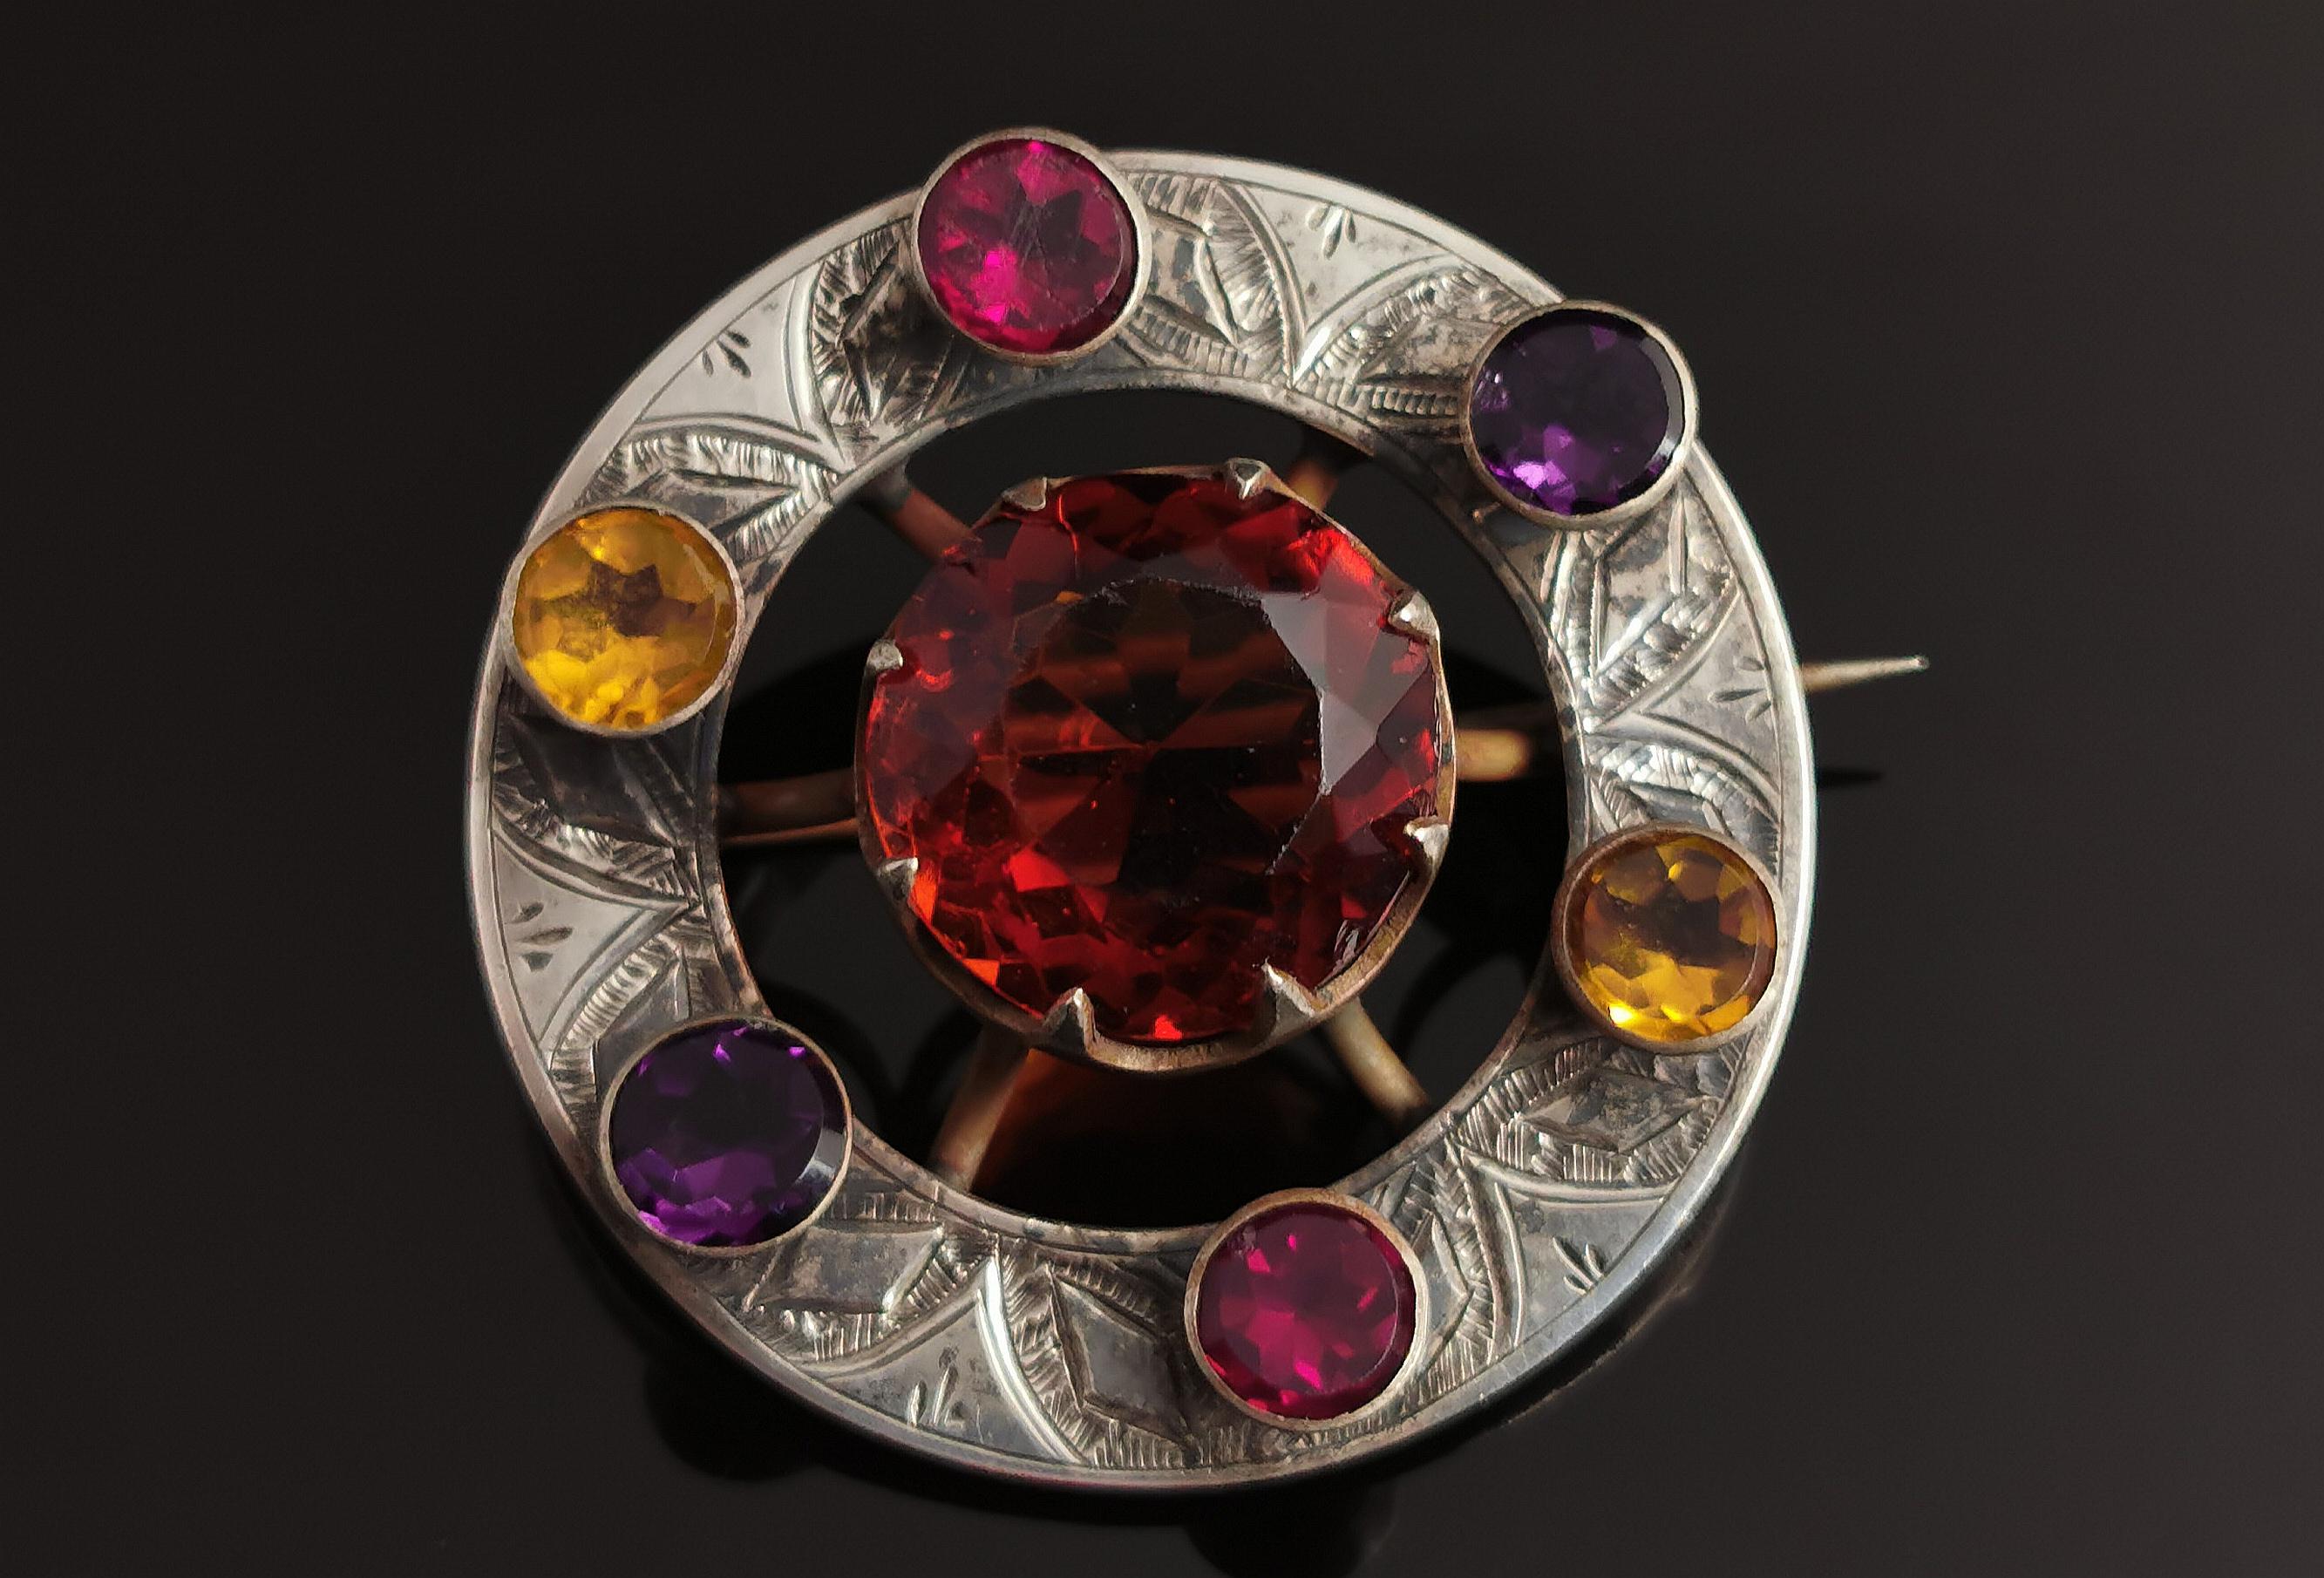 A stunning antique Victorian Scottish silver and paste brooch.

An engraved silver base set with raised colourful paste stones in various bright colours; citrus yellow, Amethyst purple and cerise pink.

The brooch is set to the centre with a large